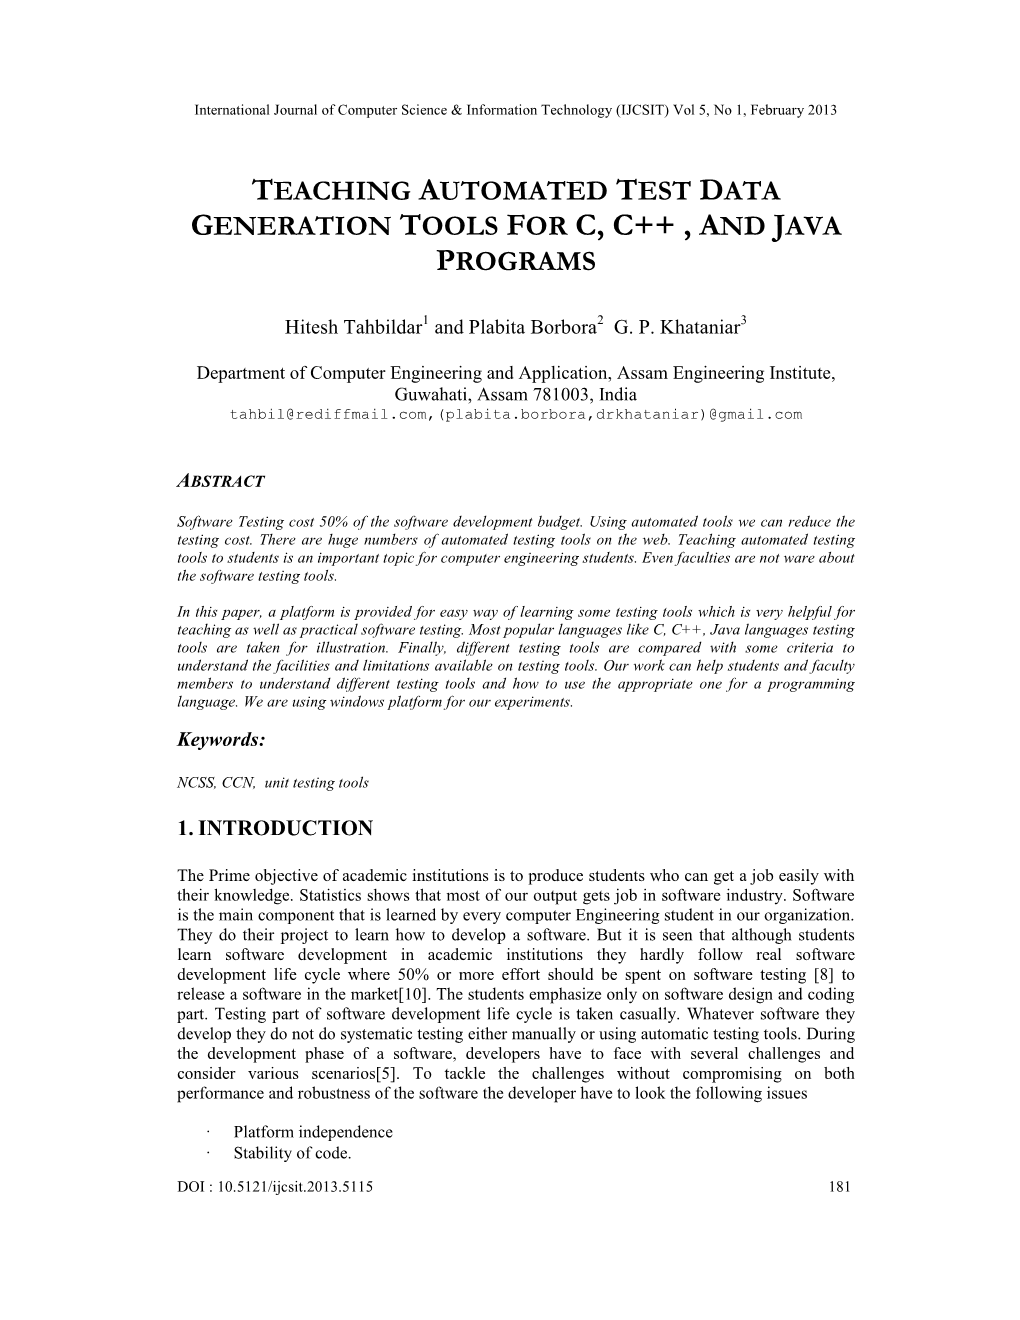 Teaching Automated Test Data Generation Tools for C, C++ , and Java Programs